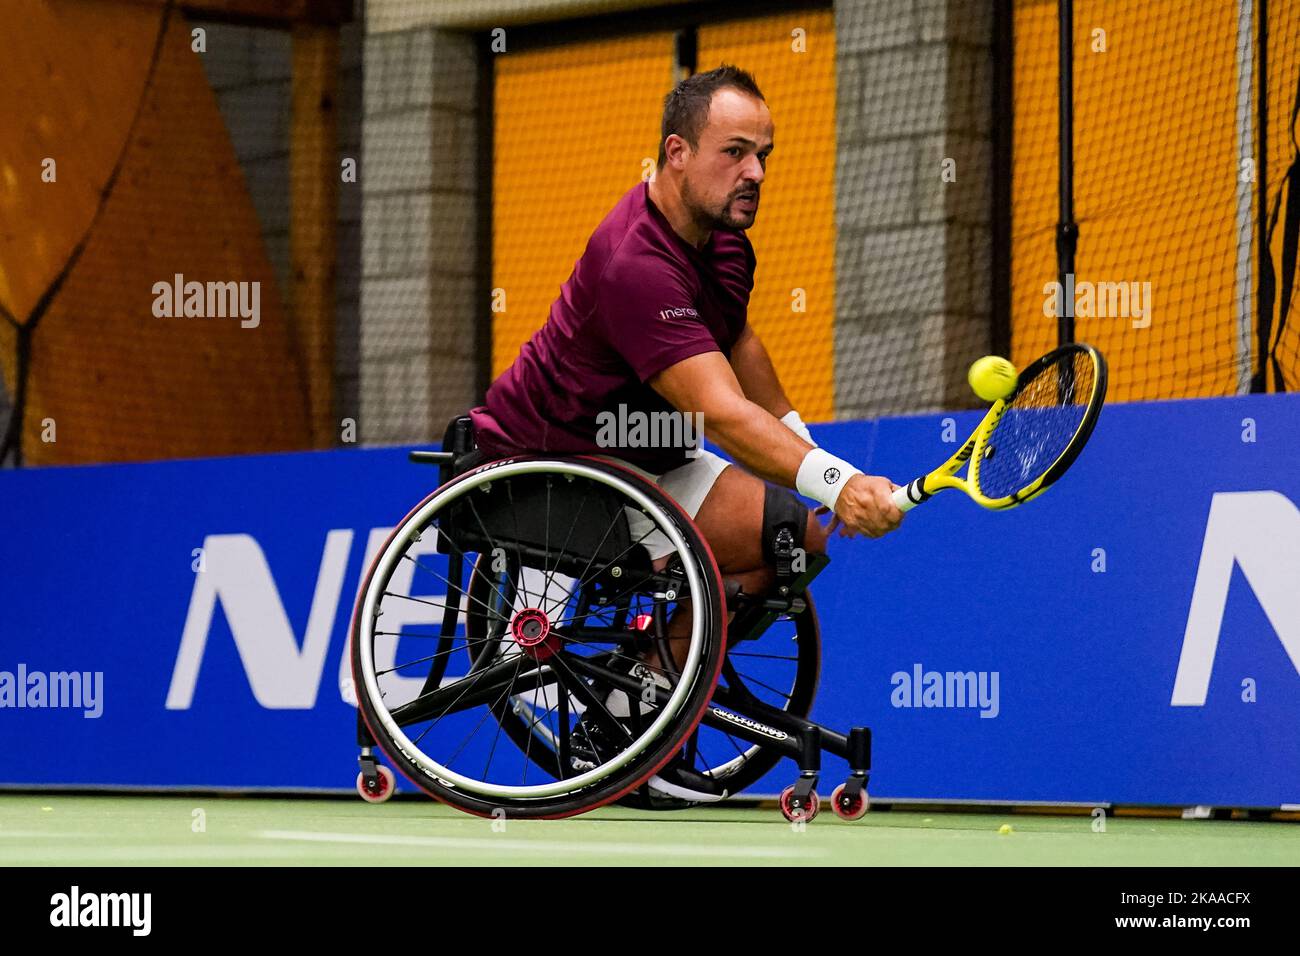 OSS, NETHERLANDS - NOVEMBER 1: Tom Egberink of the Netherlands plays a backhand in his match against Shingo Kunieda of Japan during Day 3 of the 2022 ITF Wheelchair Tennis Masters at Sportcentrum de Rusheuvel on November 1, 2022 in Oss, Netherlands (Photo by Rene Nijhuis/Orange Pictures) Stock Photo